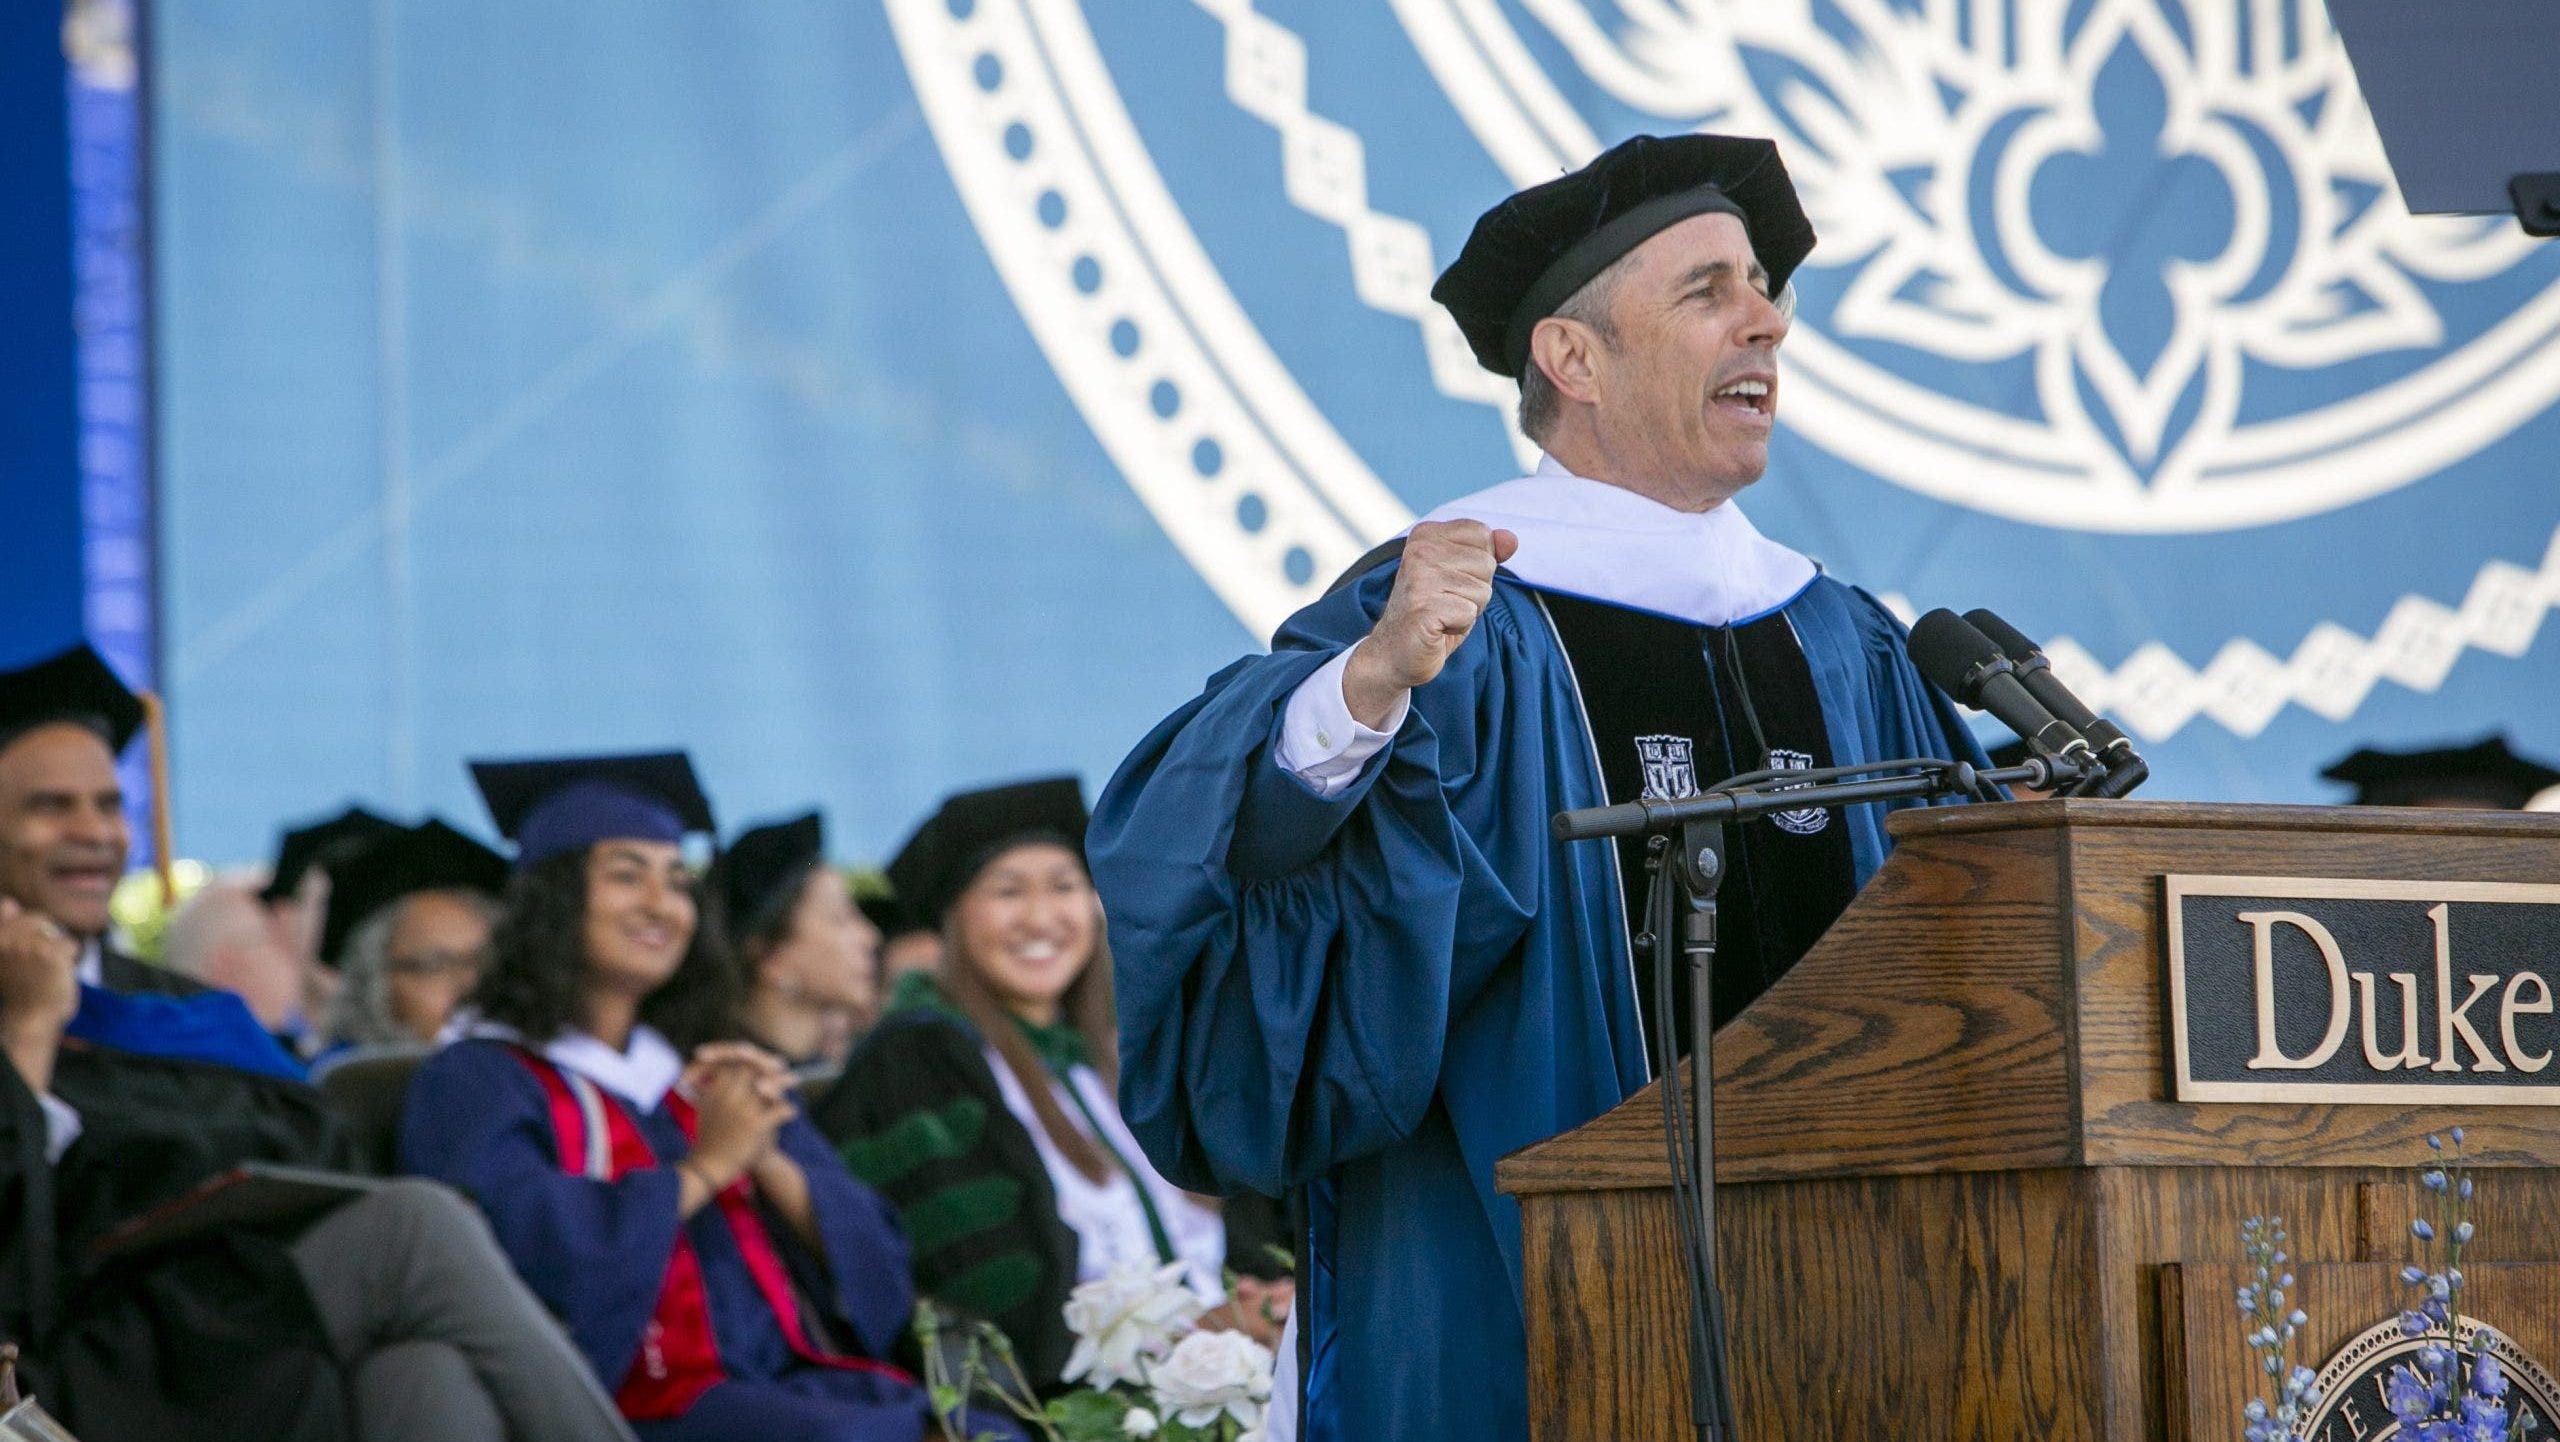 You are currently viewing Jerry Seinfeld’s wife applauds Duke crowd who drowned out anti-Israel protesters during commencement speech